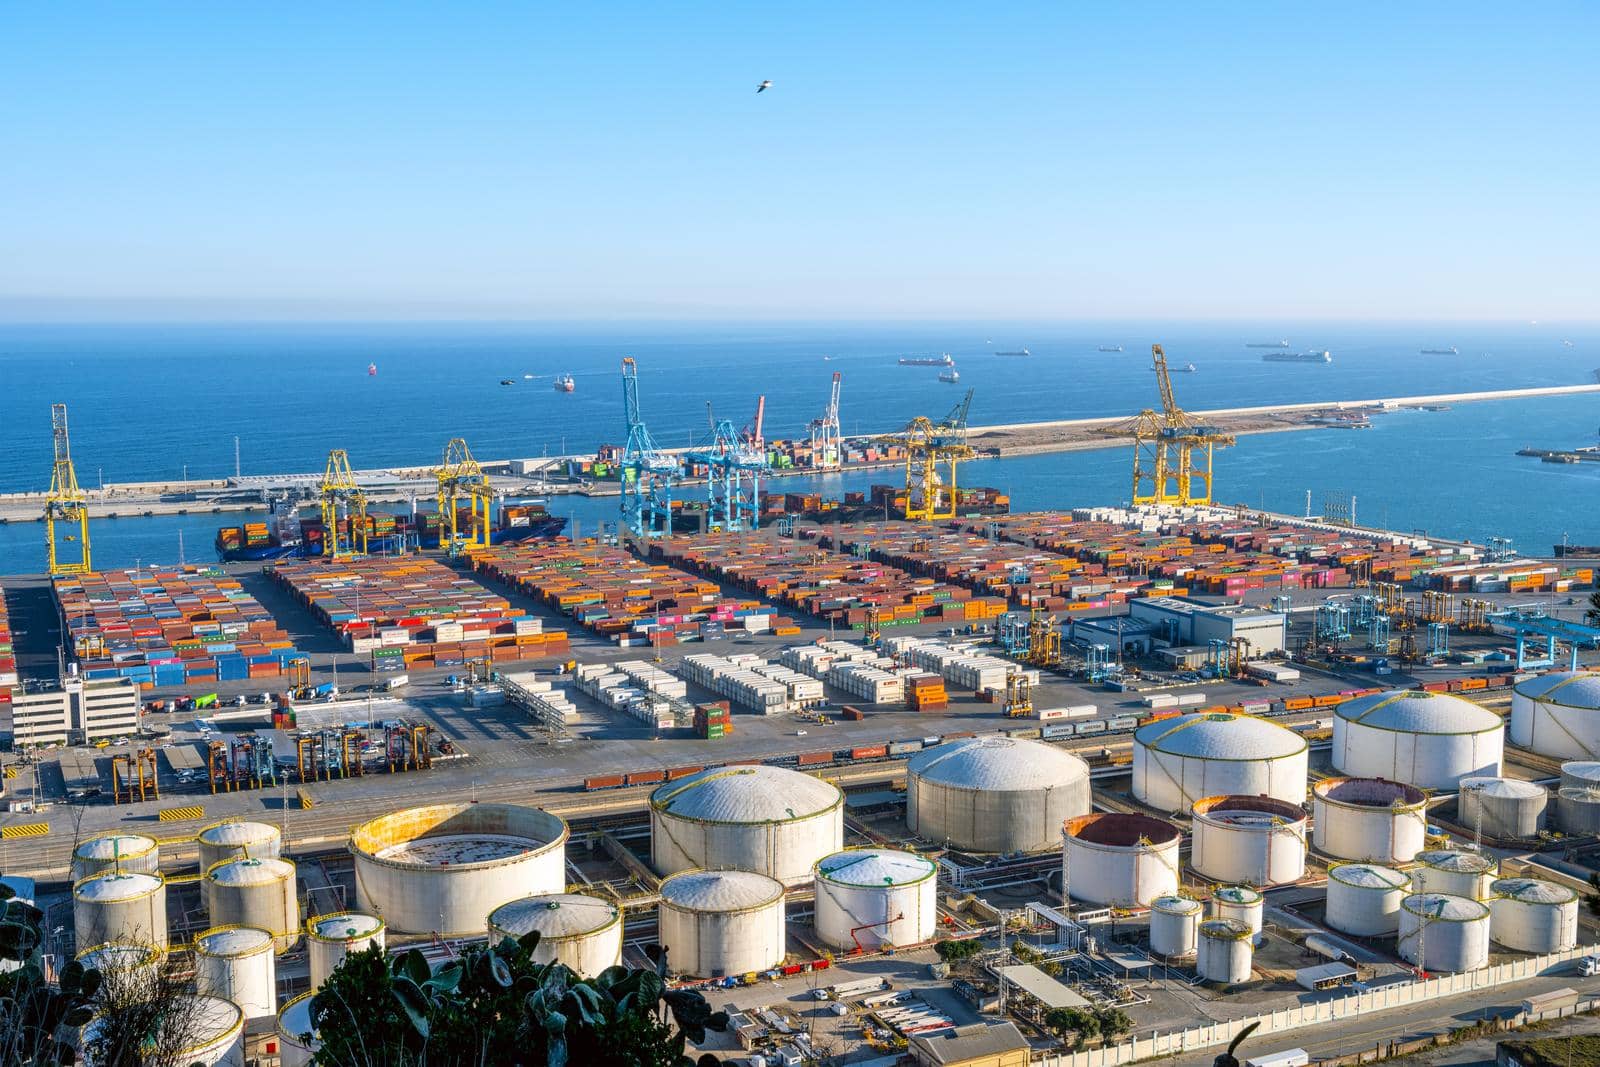 BARCELONA, SPAIN - February 02, 2022: The commercial harbour of Barcelona with containers, cranes and storage tanks